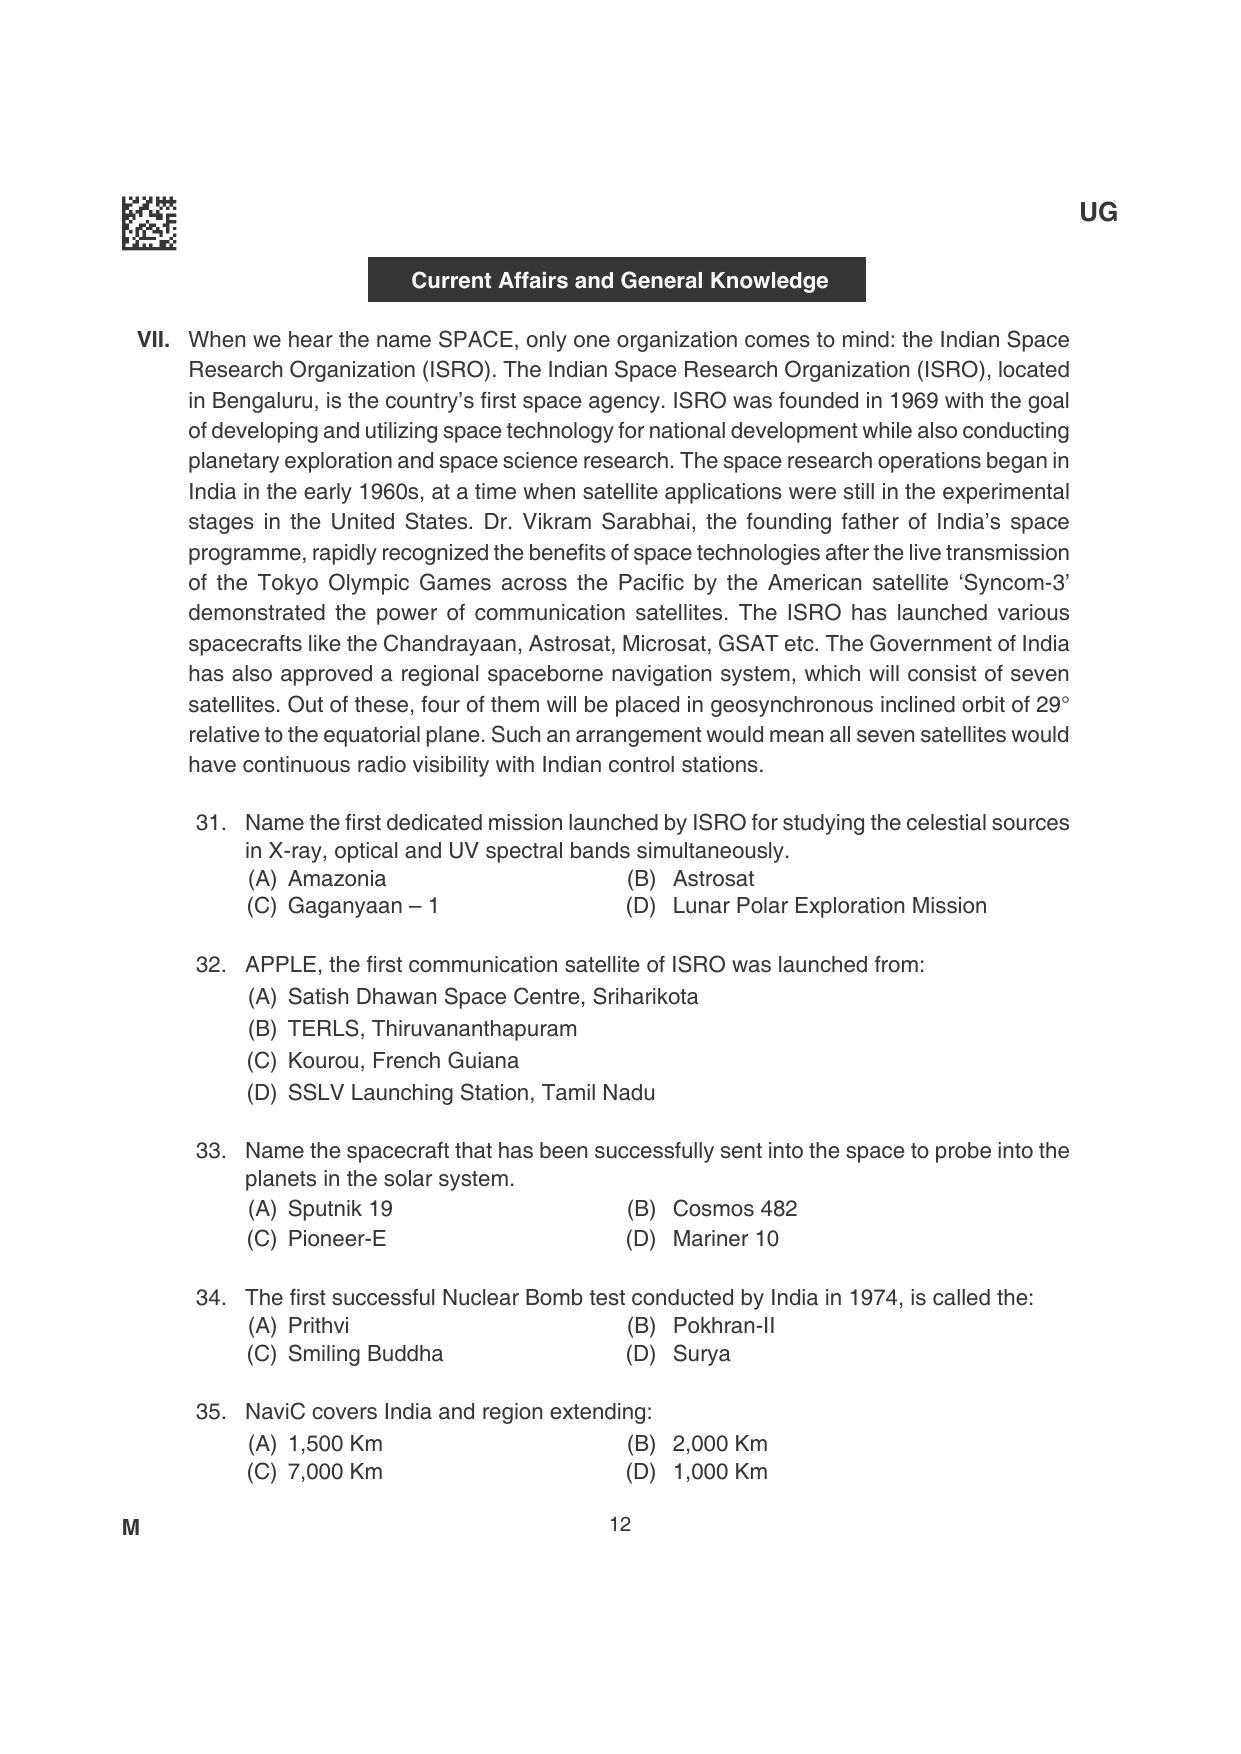 CLAT 2022 UG Question Papers - Page 12